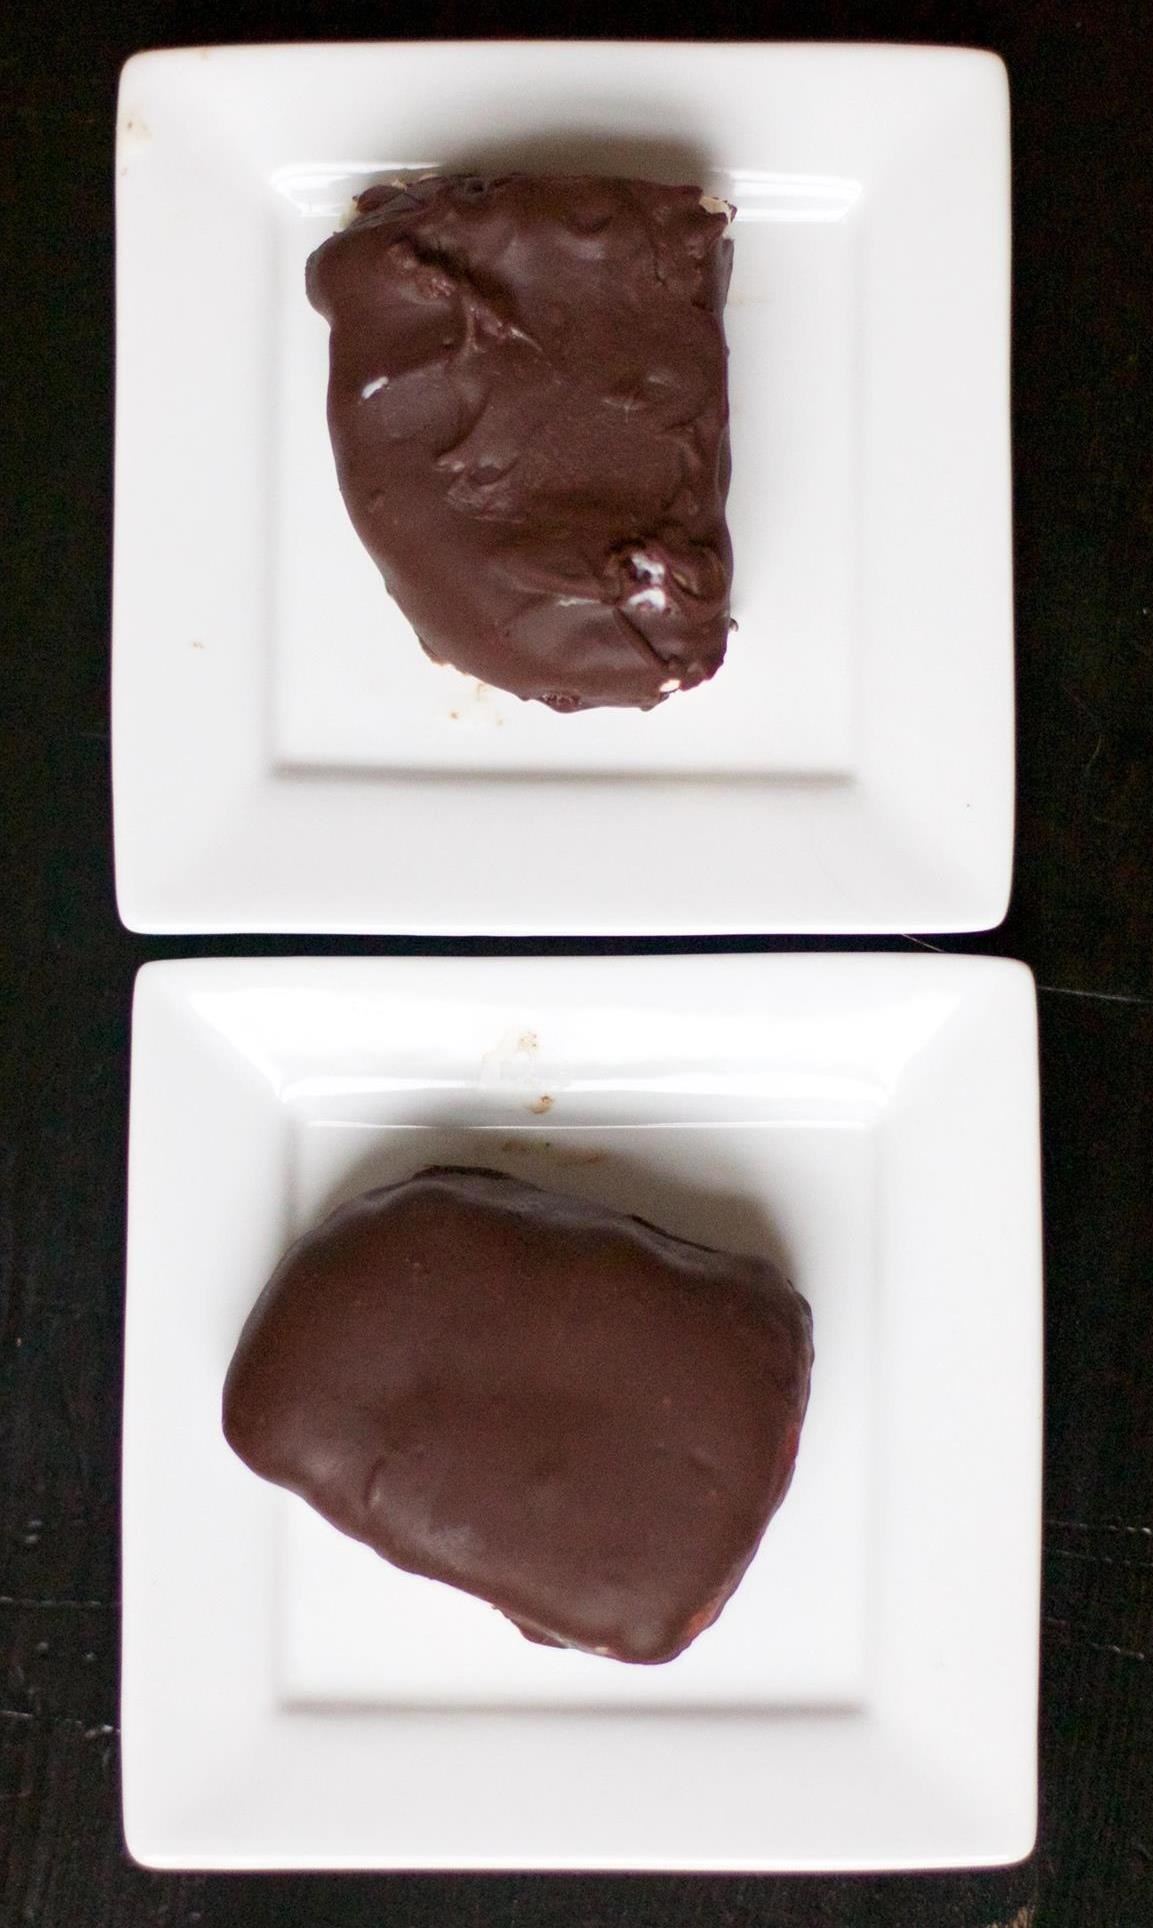 Here's the Trick to Making Klondike Bars in All Your Favorite Flavors